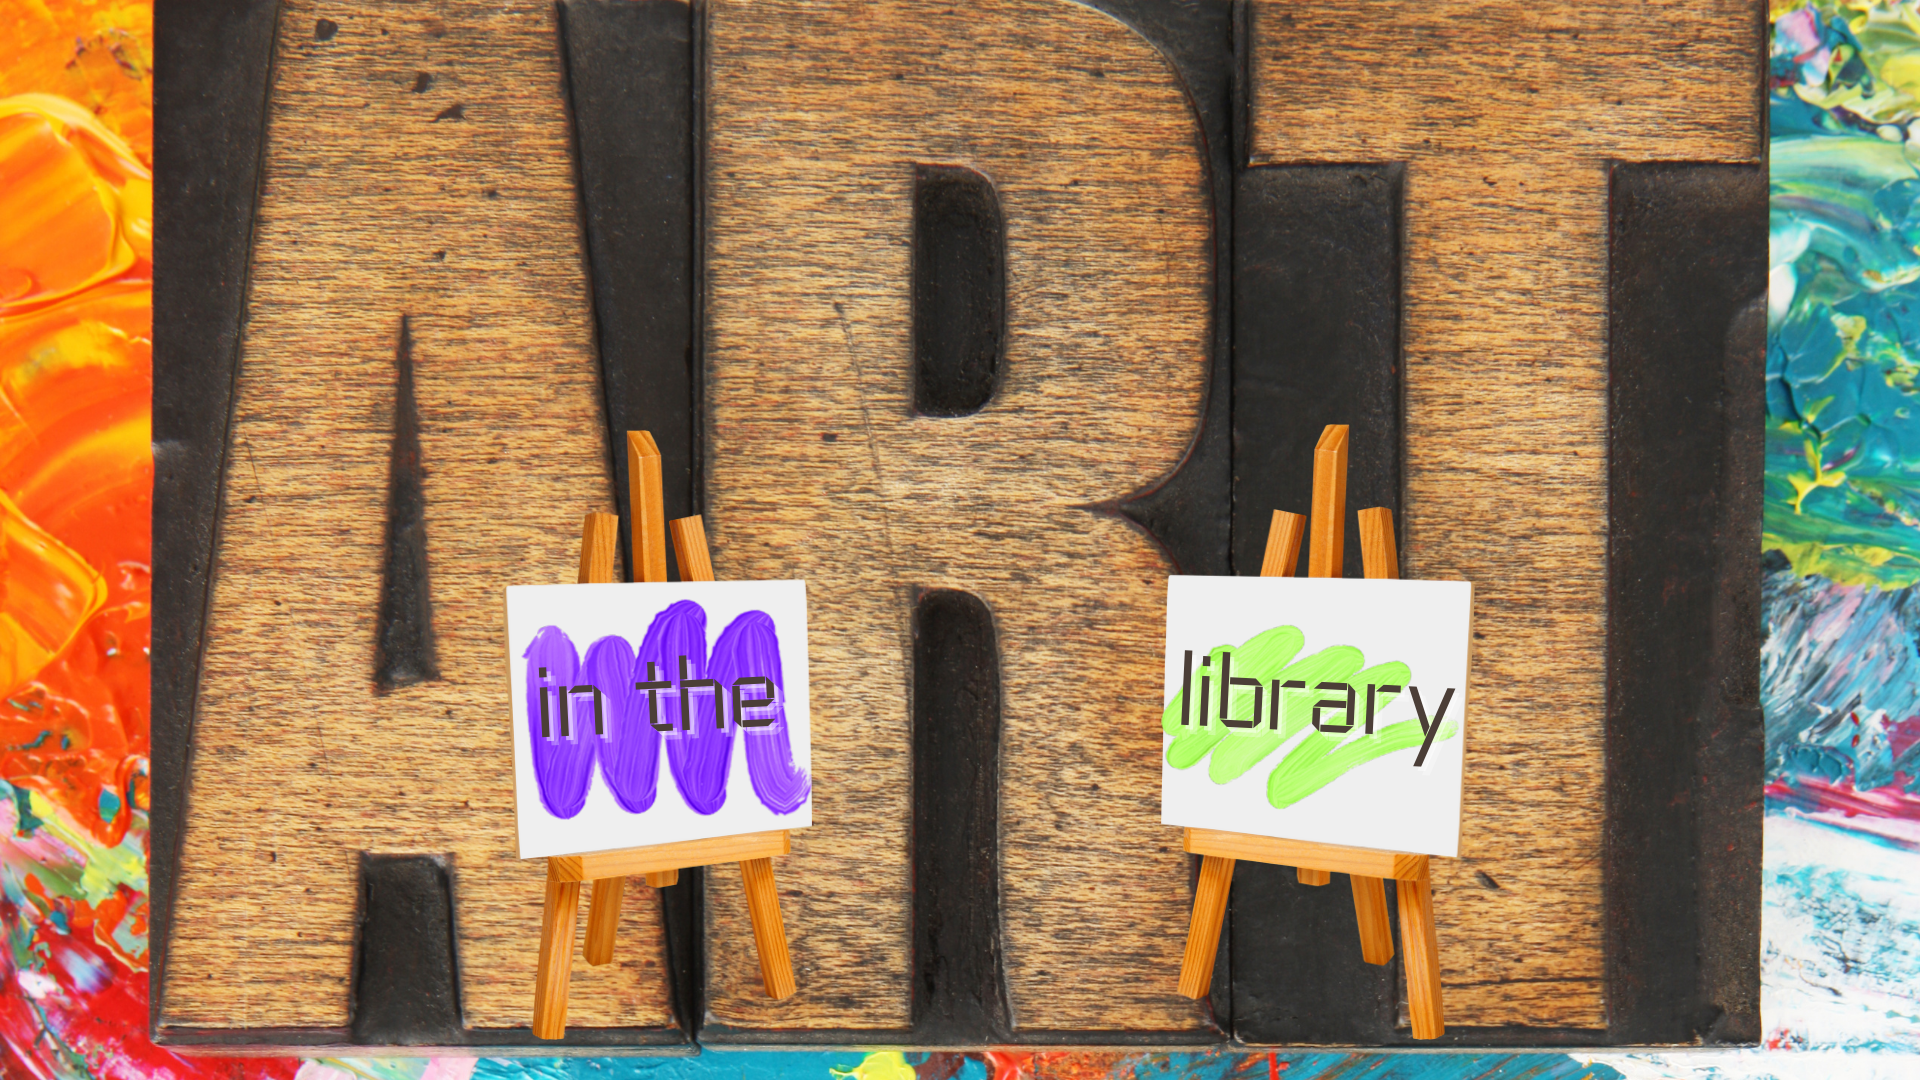 Woodblock letters spell out ART. Two easels display "in the" and "library."